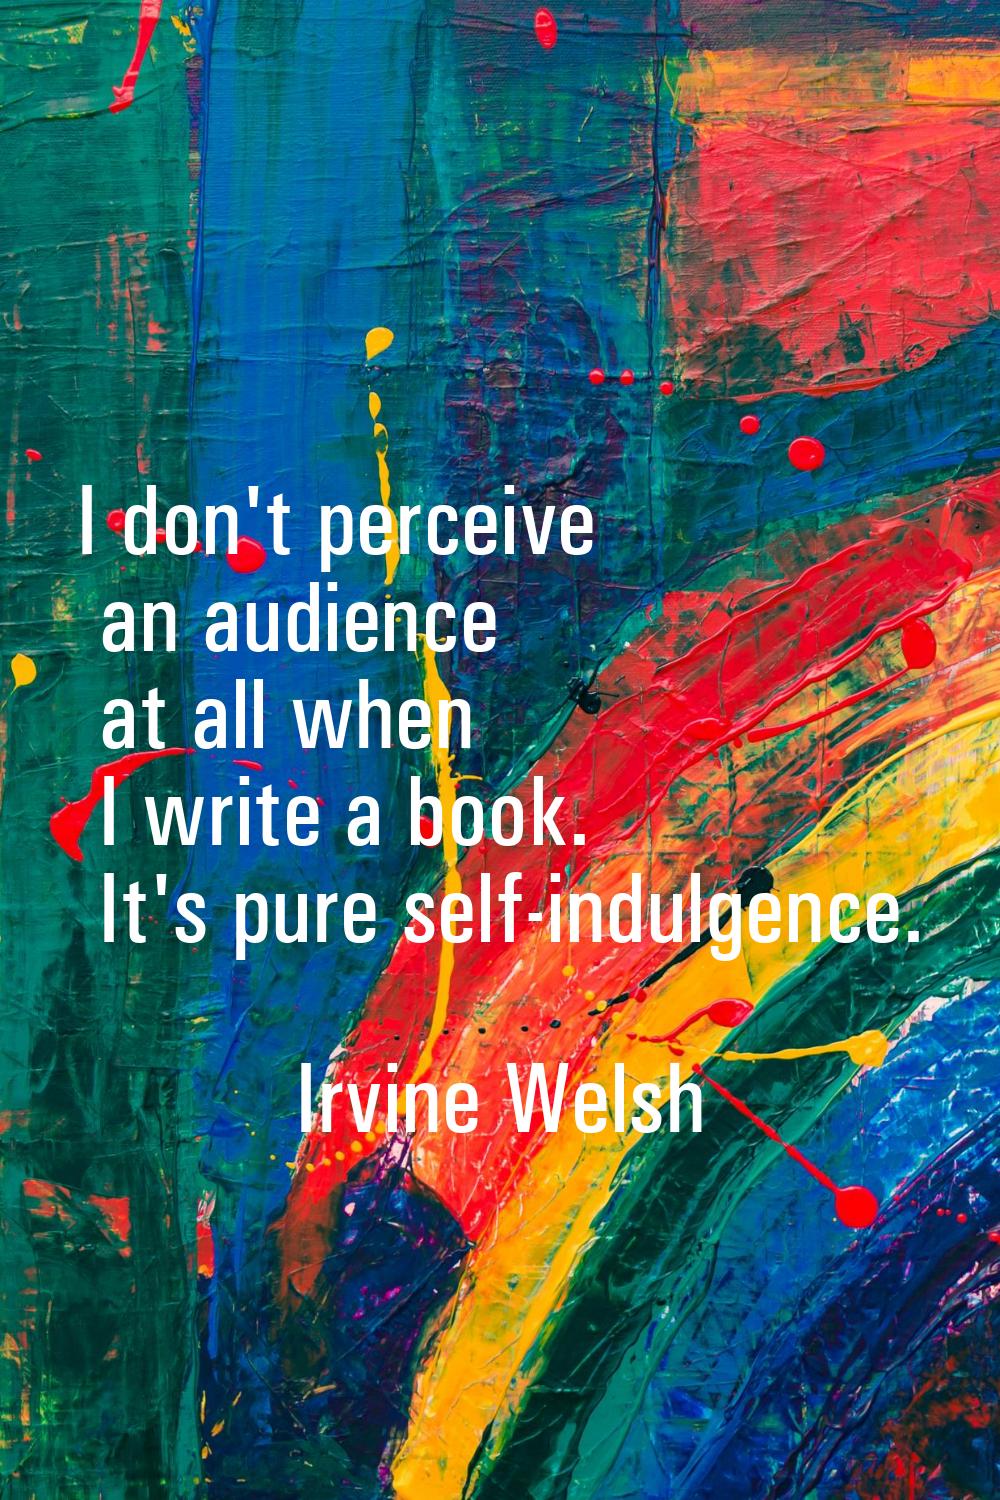 I don't perceive an audience at all when I write a book. It's pure self-indulgence.